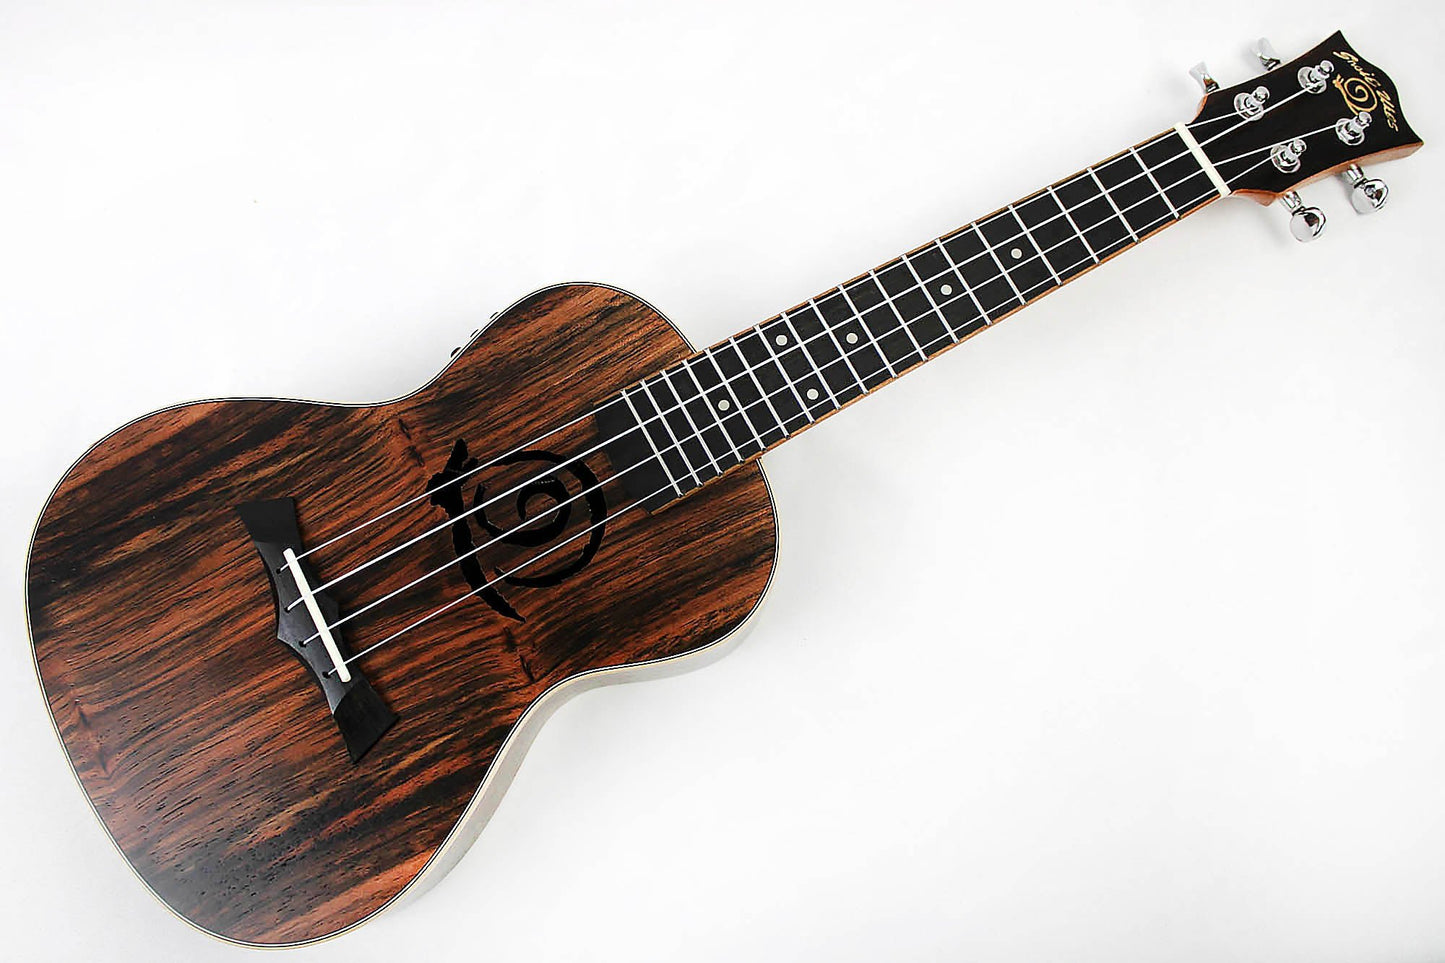 This is the front full view of the top and neck of a Snail SNAILEBUKEQ Ebony Ukulele Concert EQ.